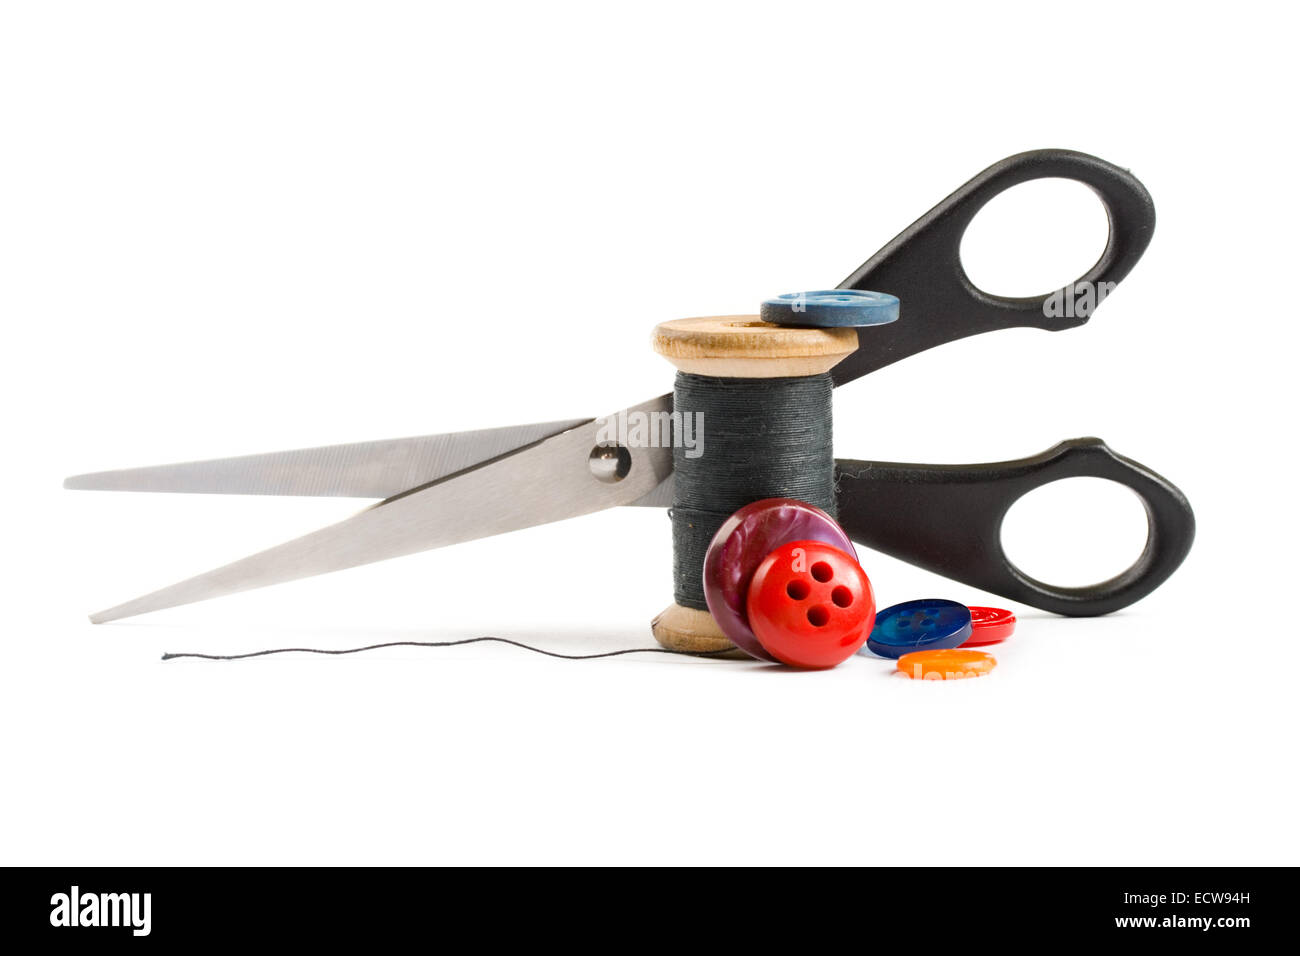 Thread bobbin, scissors and buttons isolated on white background Stock Photo